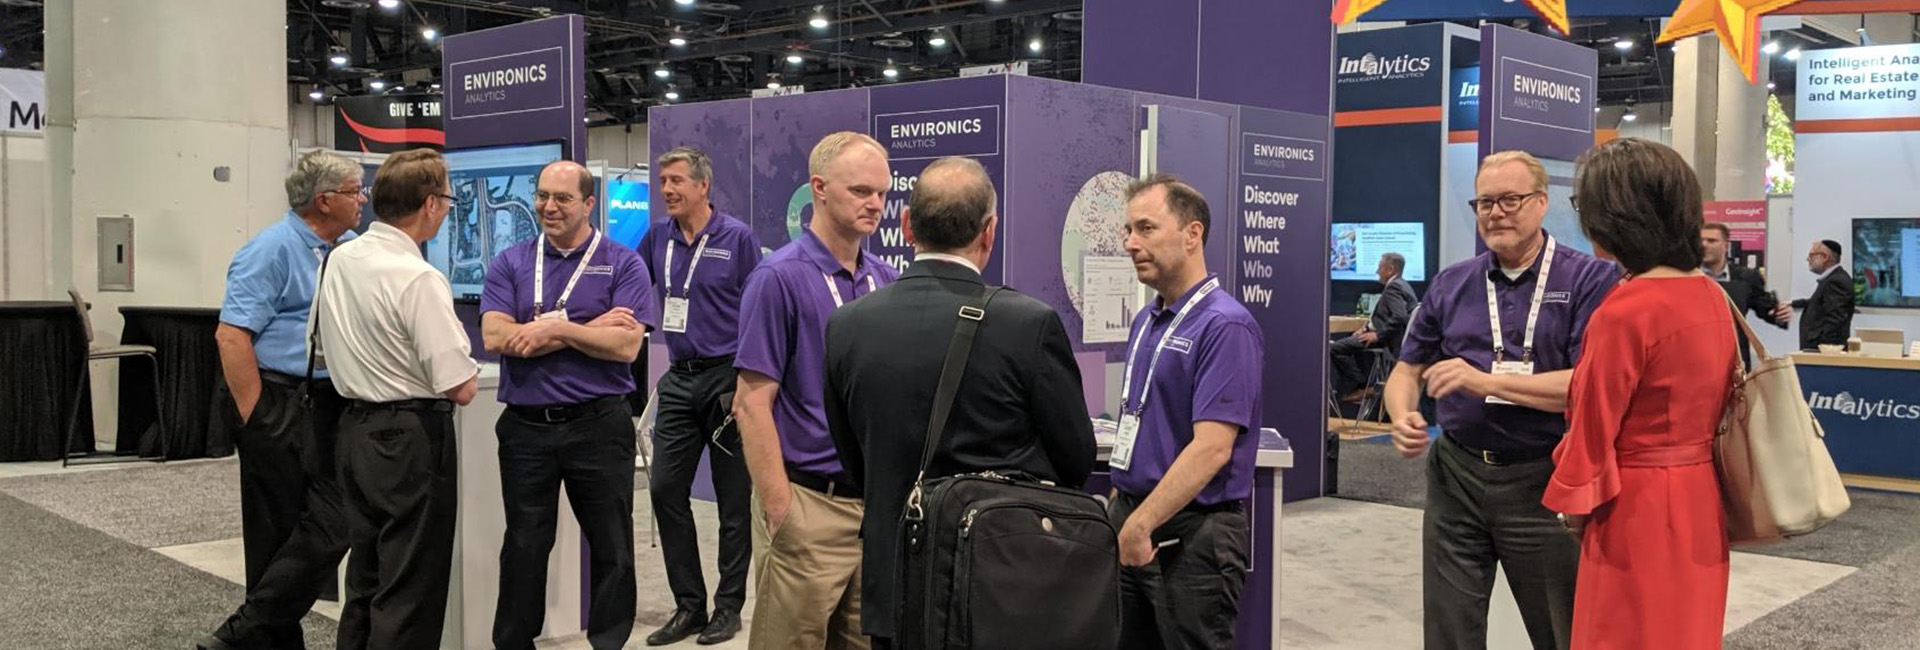 Group of people standing and talking to each other at an Environics Analytics event booth